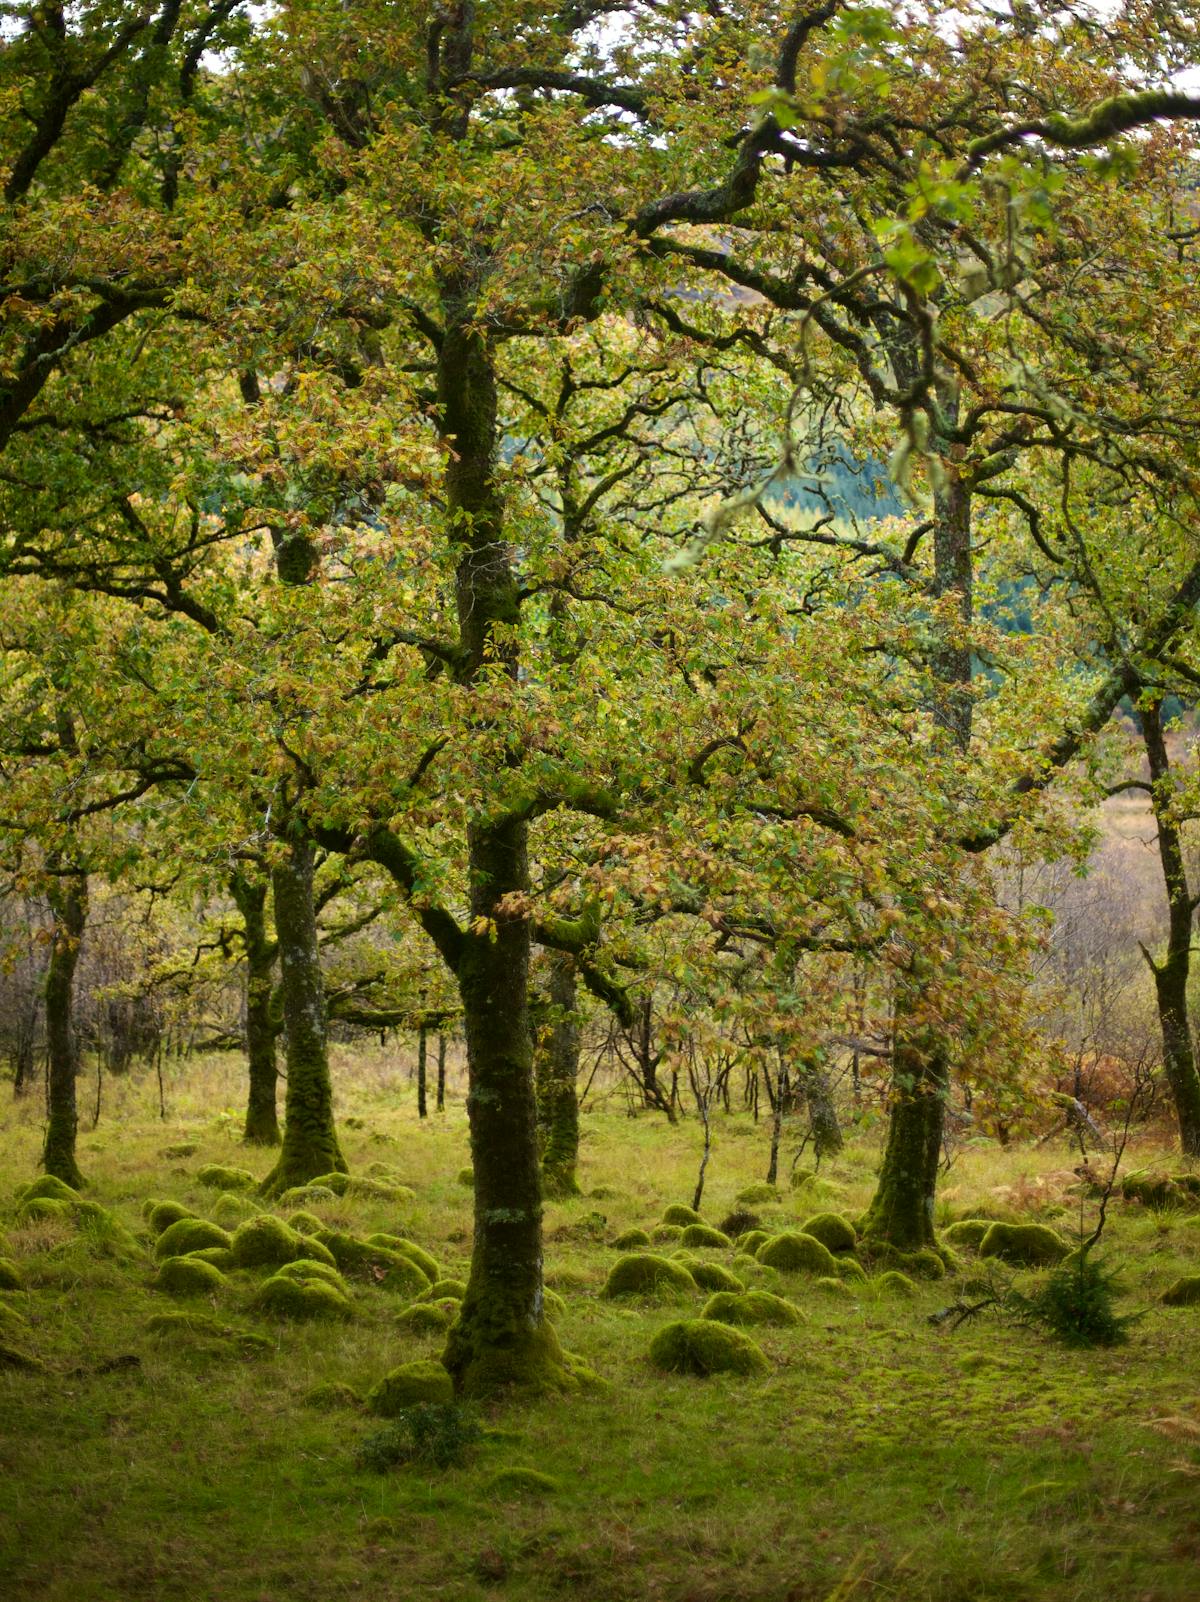 The view through a forest of oak trees, with a moss covered ground